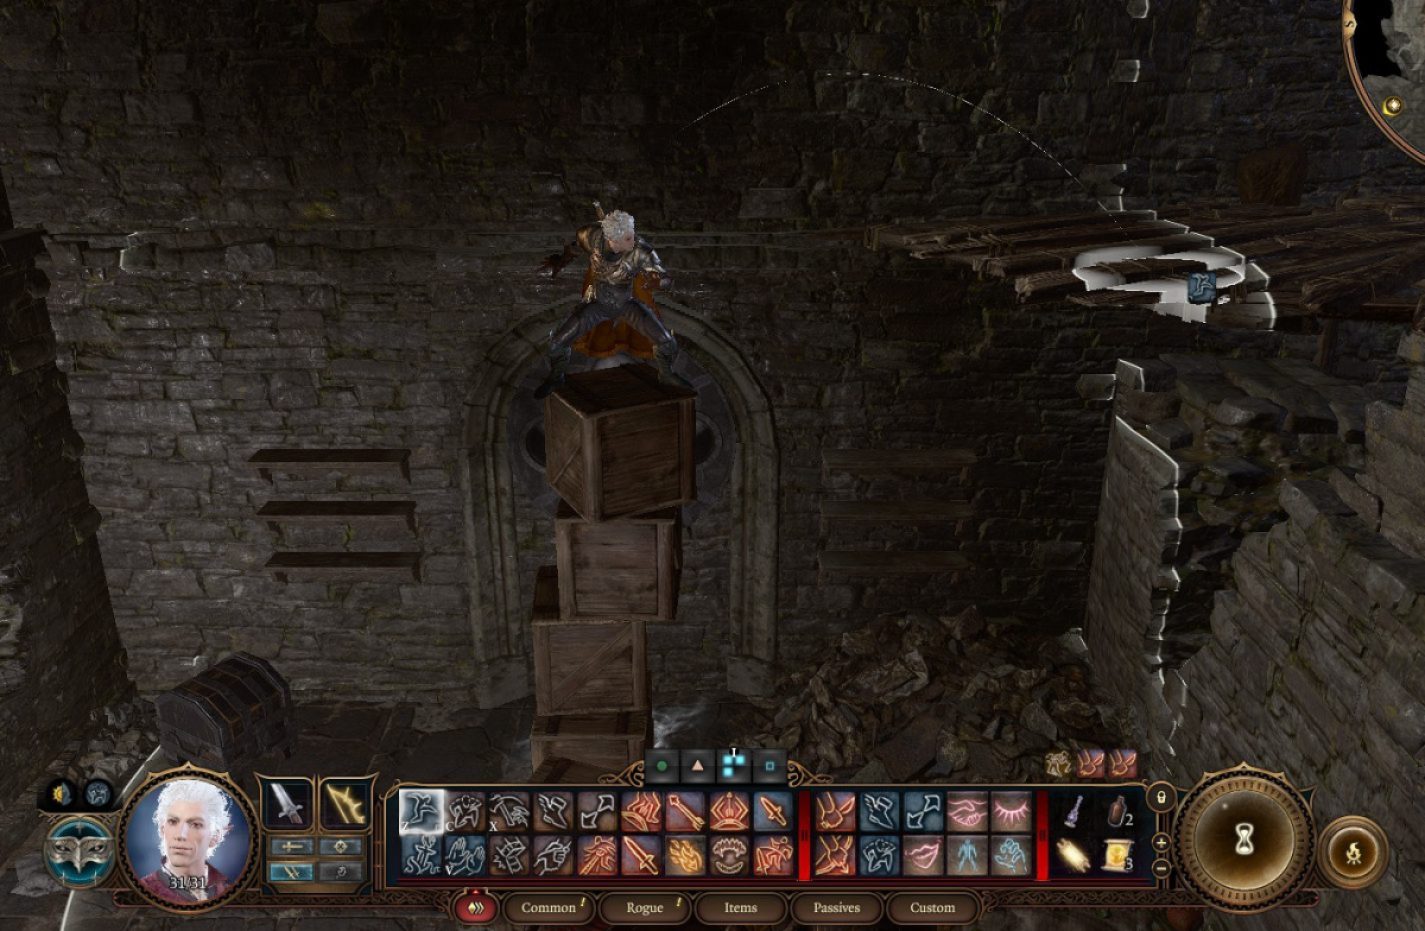 Astarion in 'Baldur's Gate 3' jumping to a ledge thanks to box stacking. Image cropped to remove spoilers.